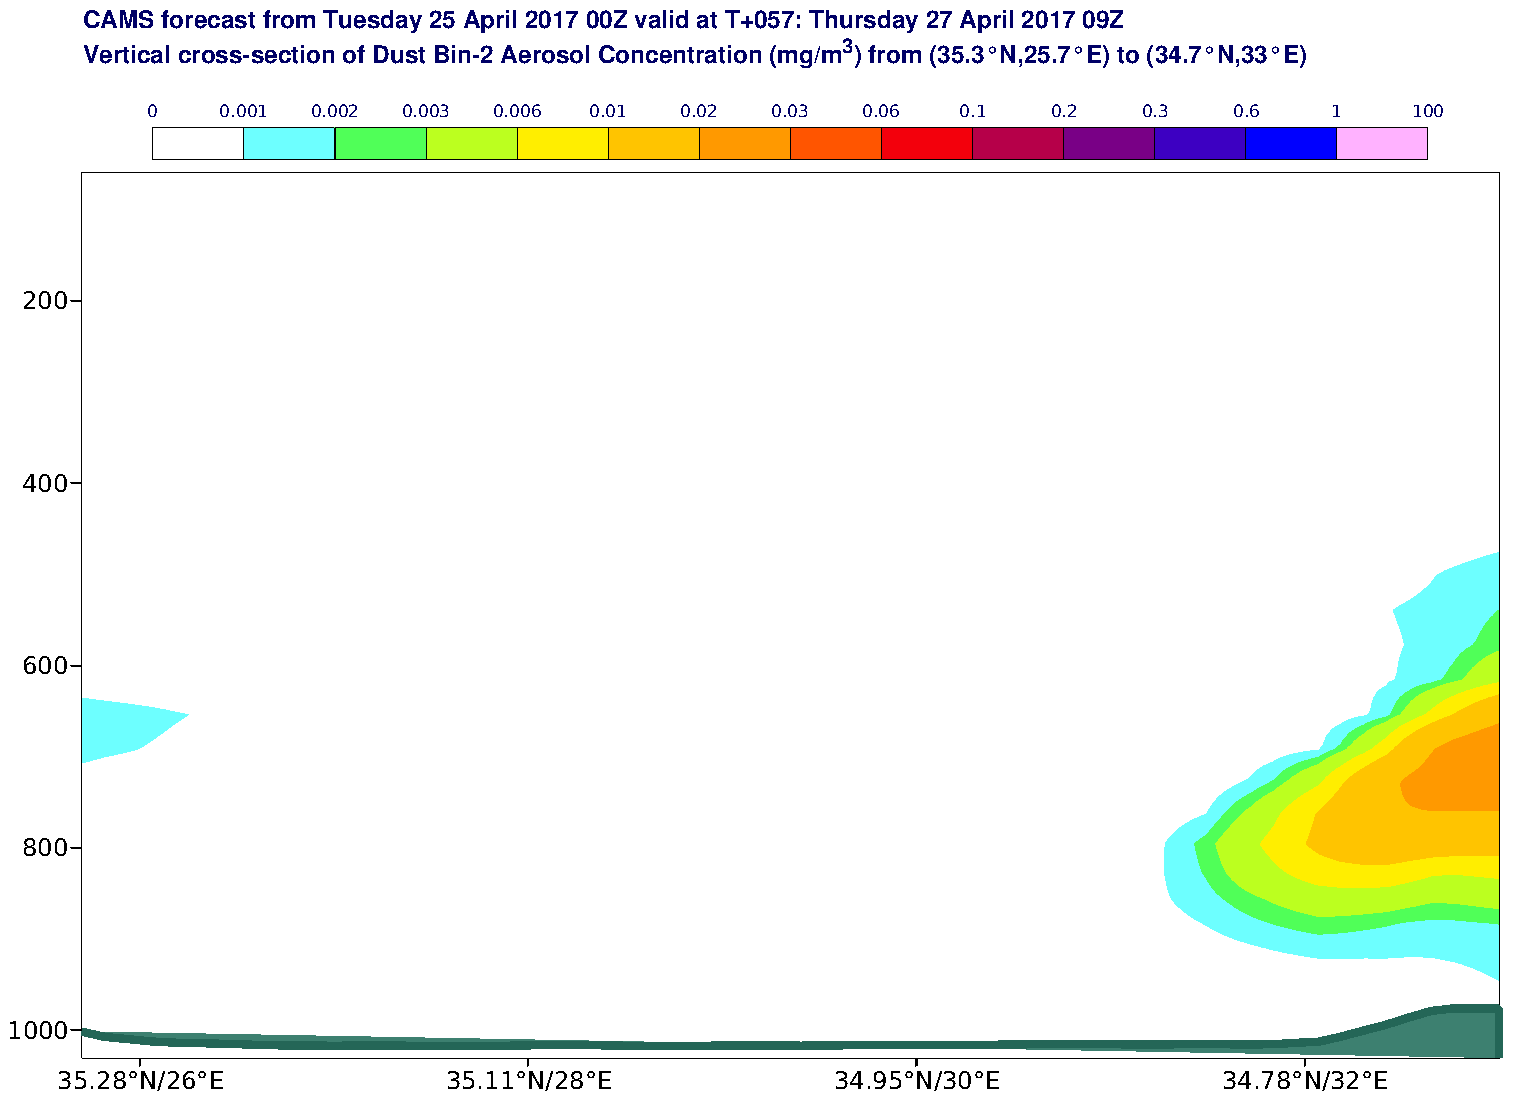 Vertical cross-section of Dust Bin-2 Aerosol Concentration (mg/m3) valid at T57 - 2017-04-27 09:00